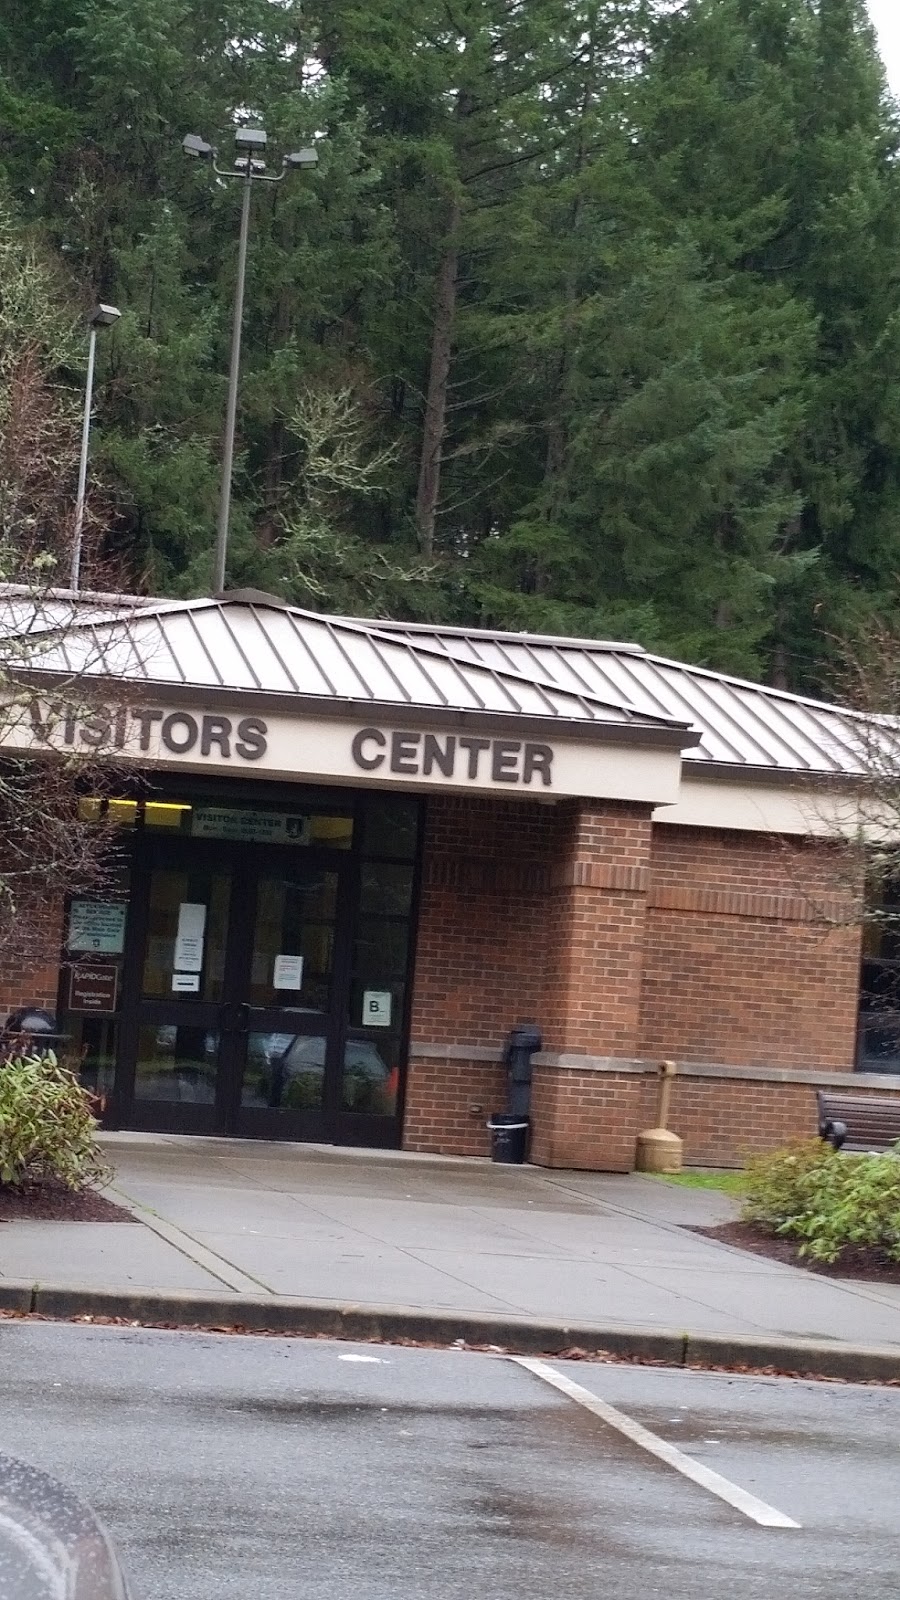 McChord Field Visitor Center | Fairway Rd, McChord AFB, WA 98438, USA | Phone: (253) 982-2119